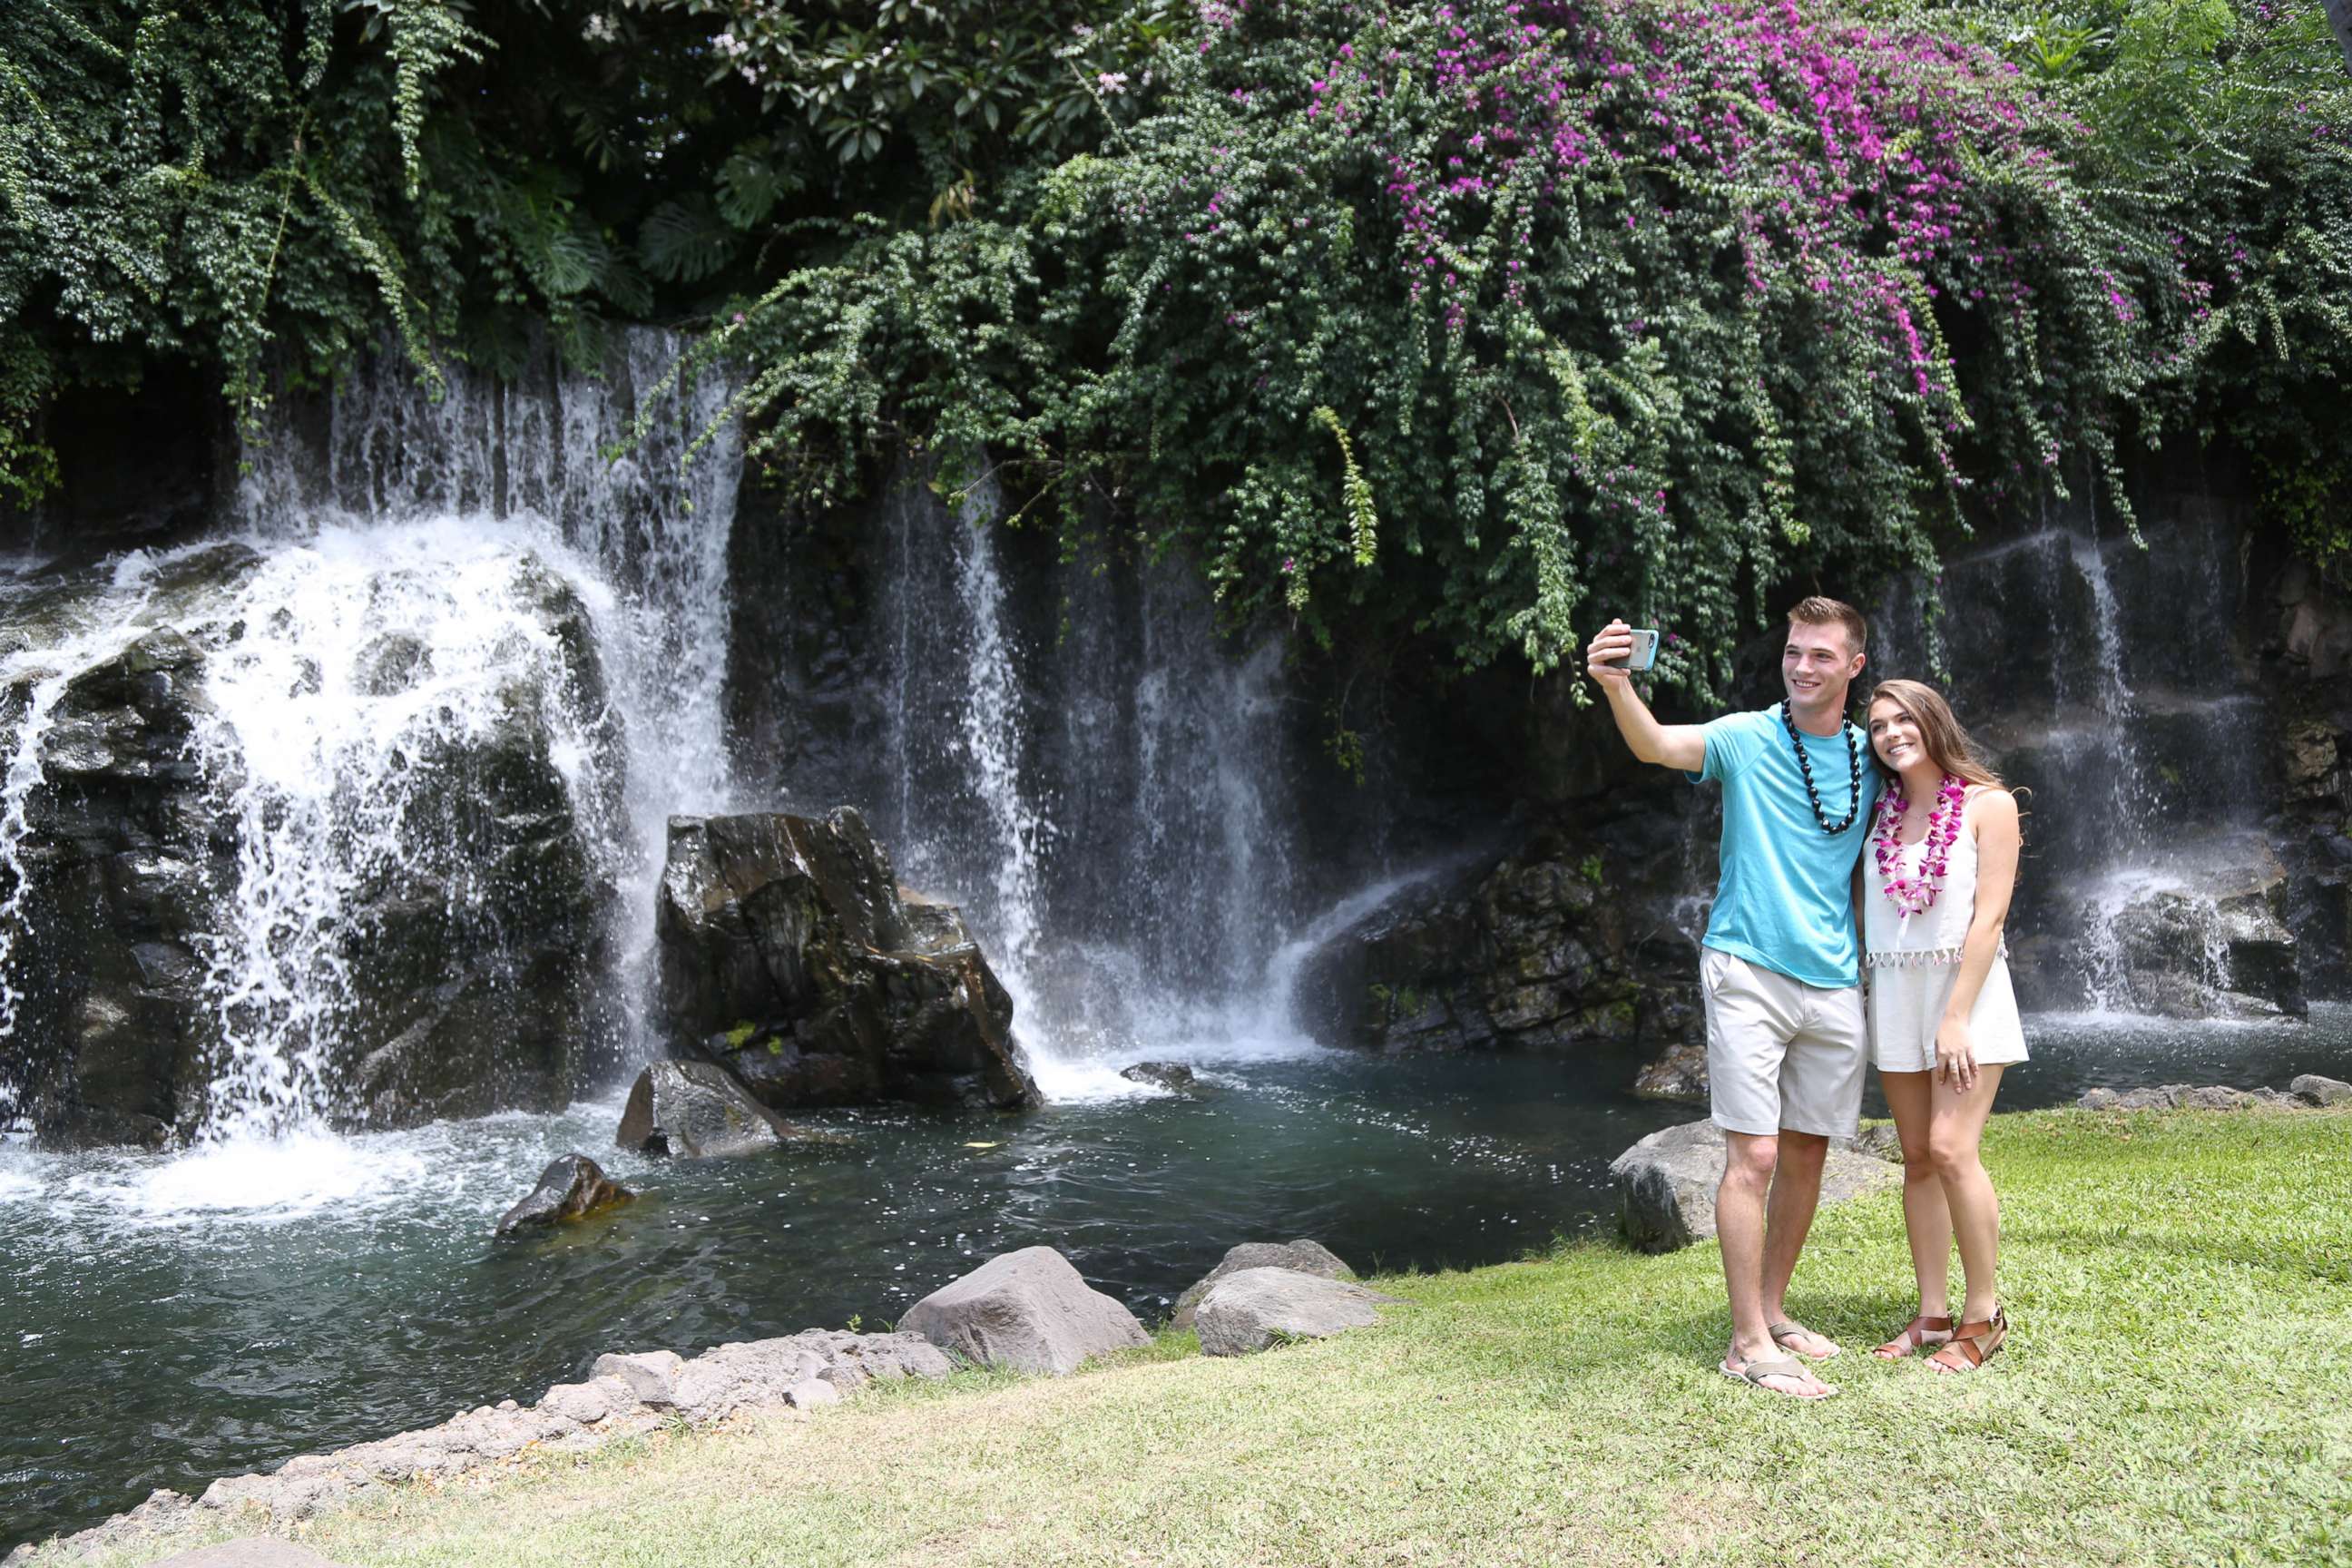 PHOTO: Josh and Michelle snap a selfie on their date in front of a waterfall in Maui.